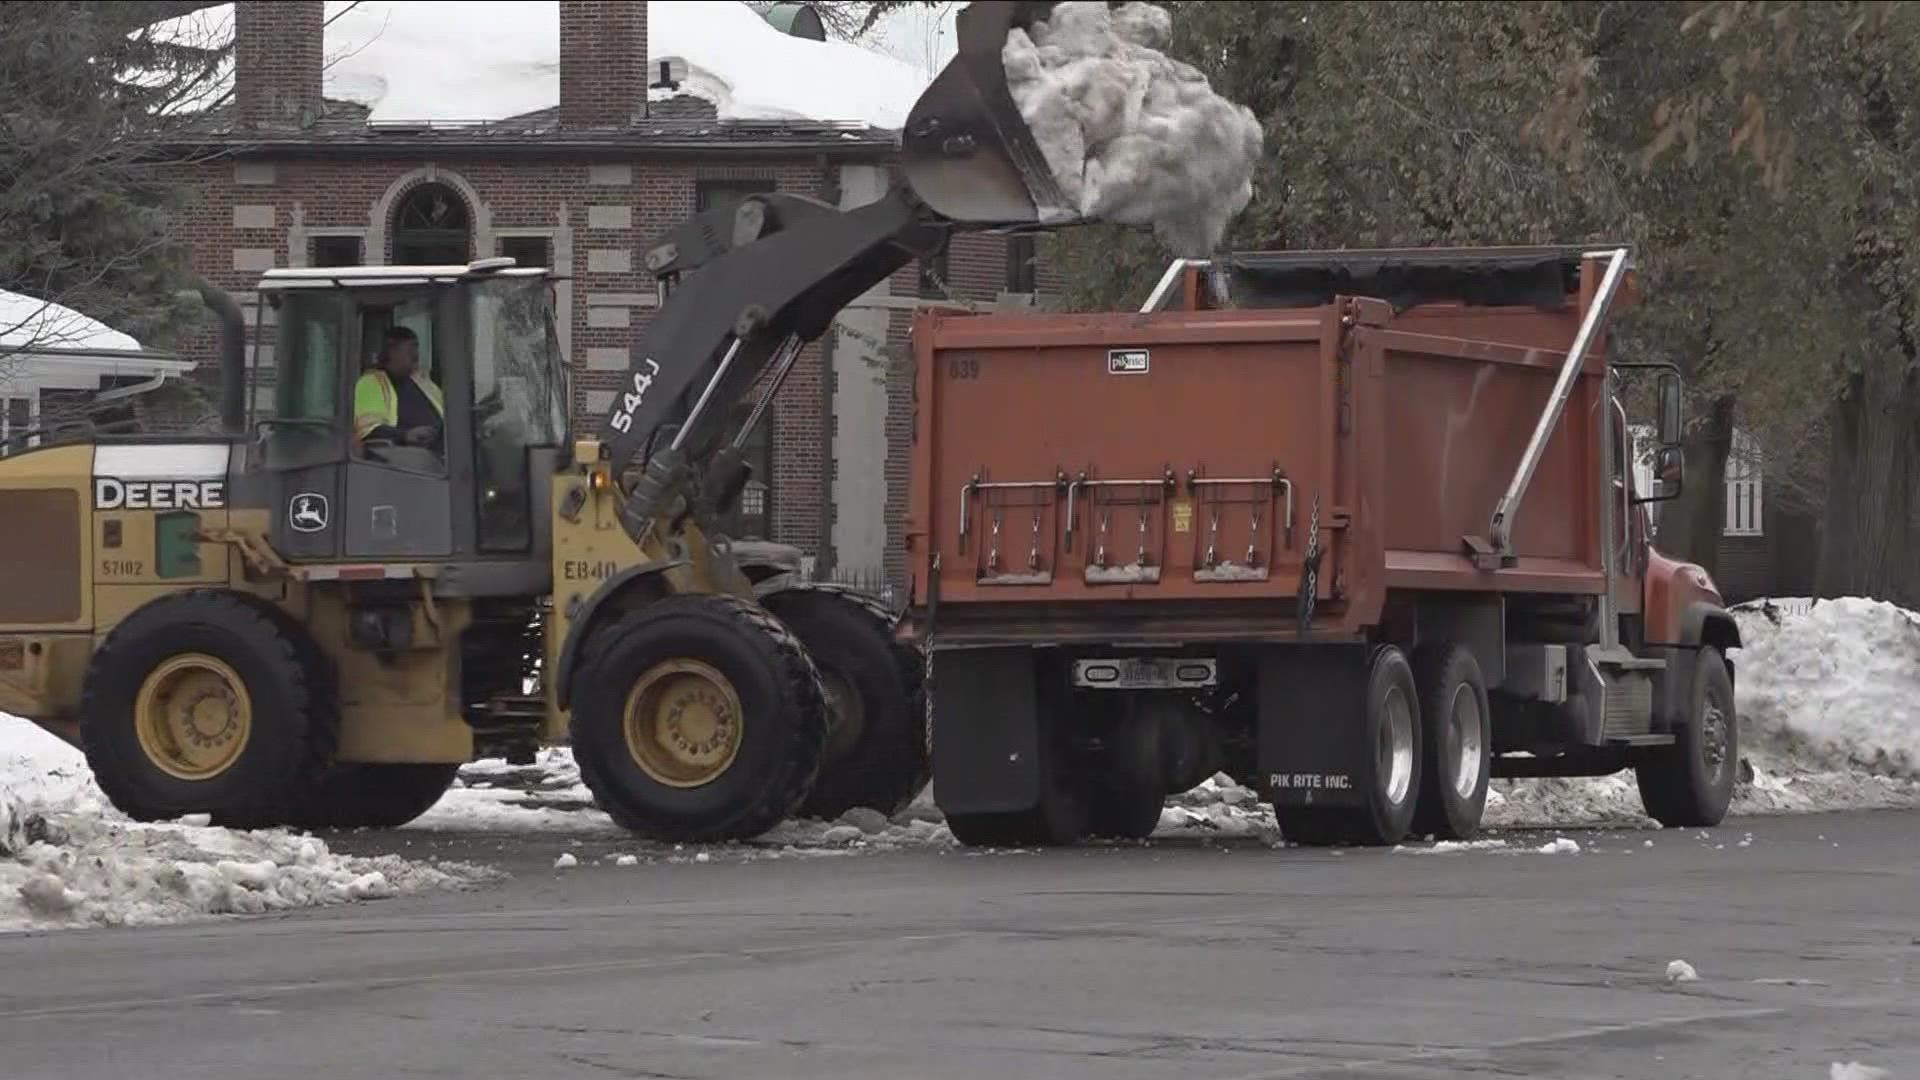 Crews are split doing one of two things removing snow or clearing streets